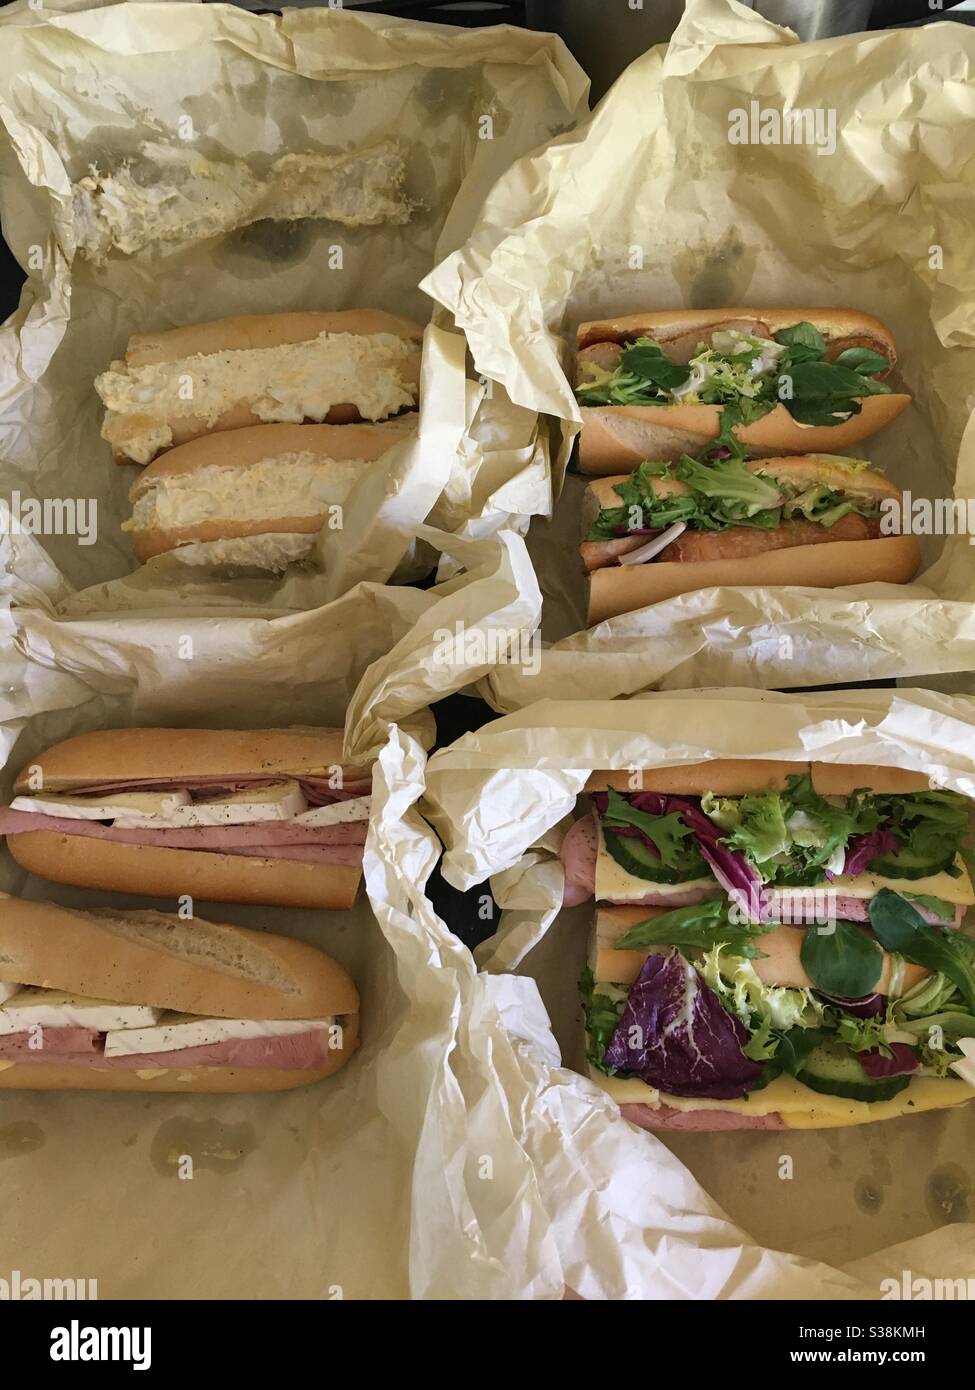 Takeaway lunch during lockdown - assorted filled baguettes Stock Photo